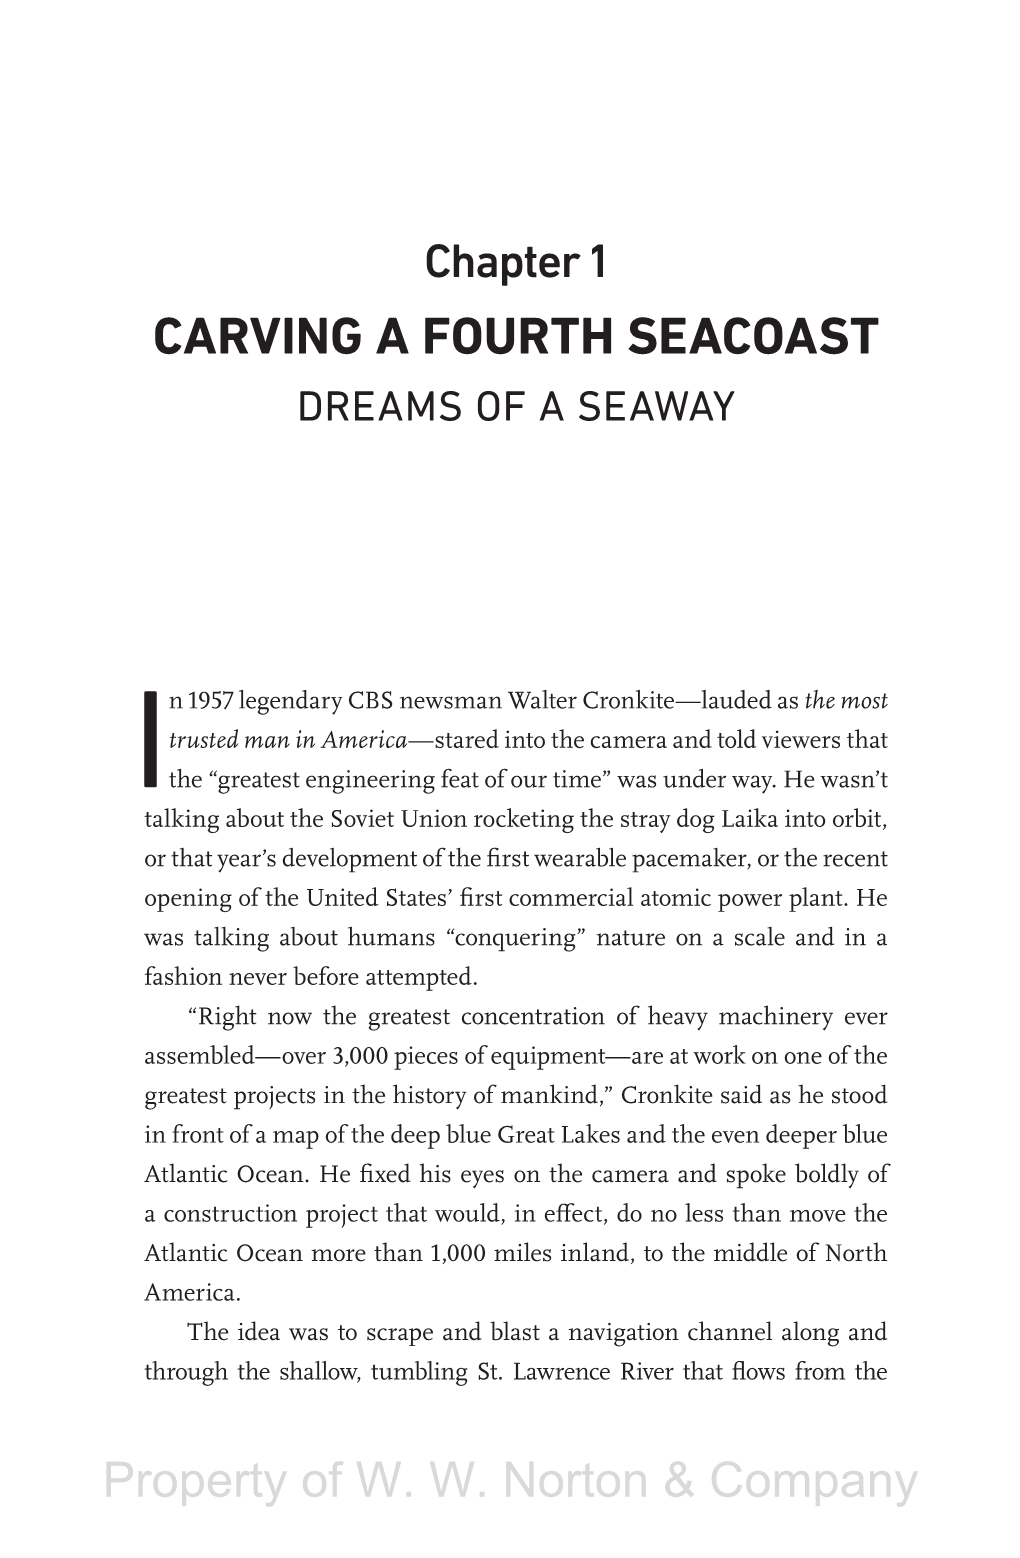 Carving a Fourth Seacoast Dreams of a Seaway